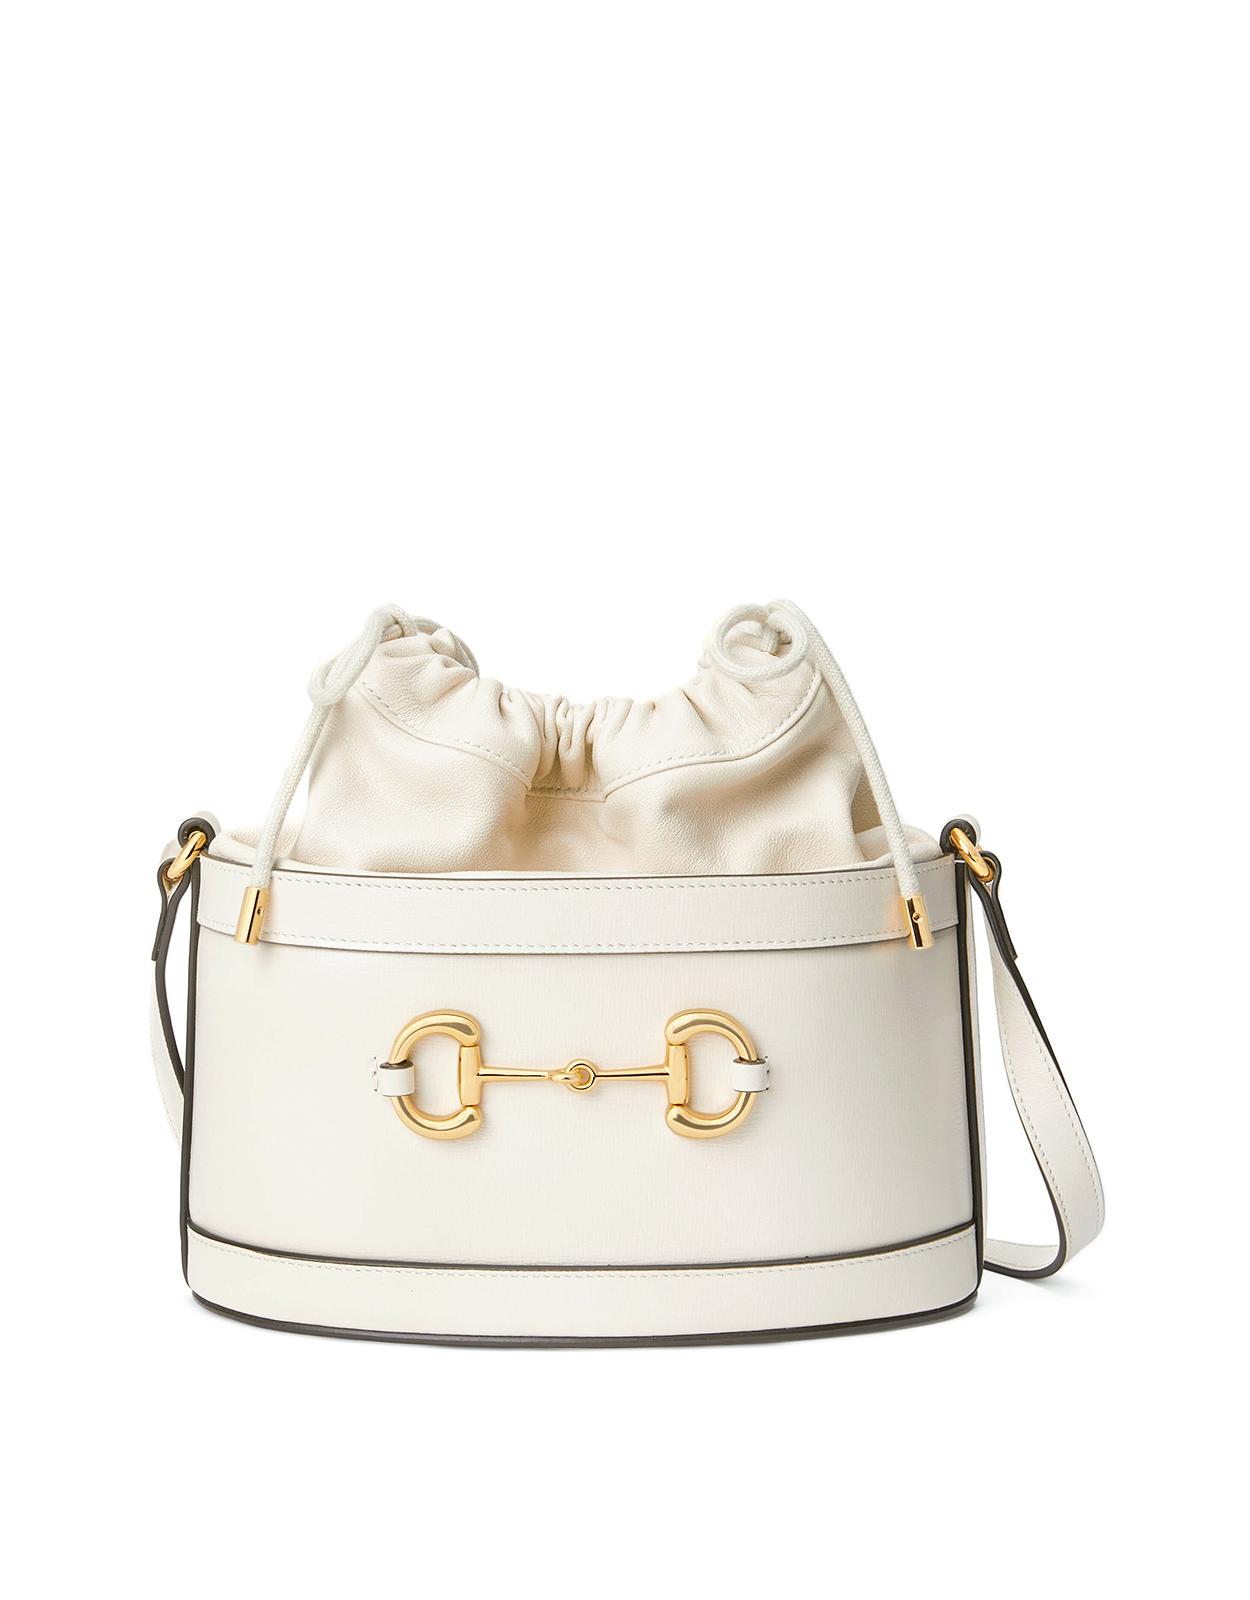 Gucci Leather 1955 Horsebit Bucket Bag in White - Lyst